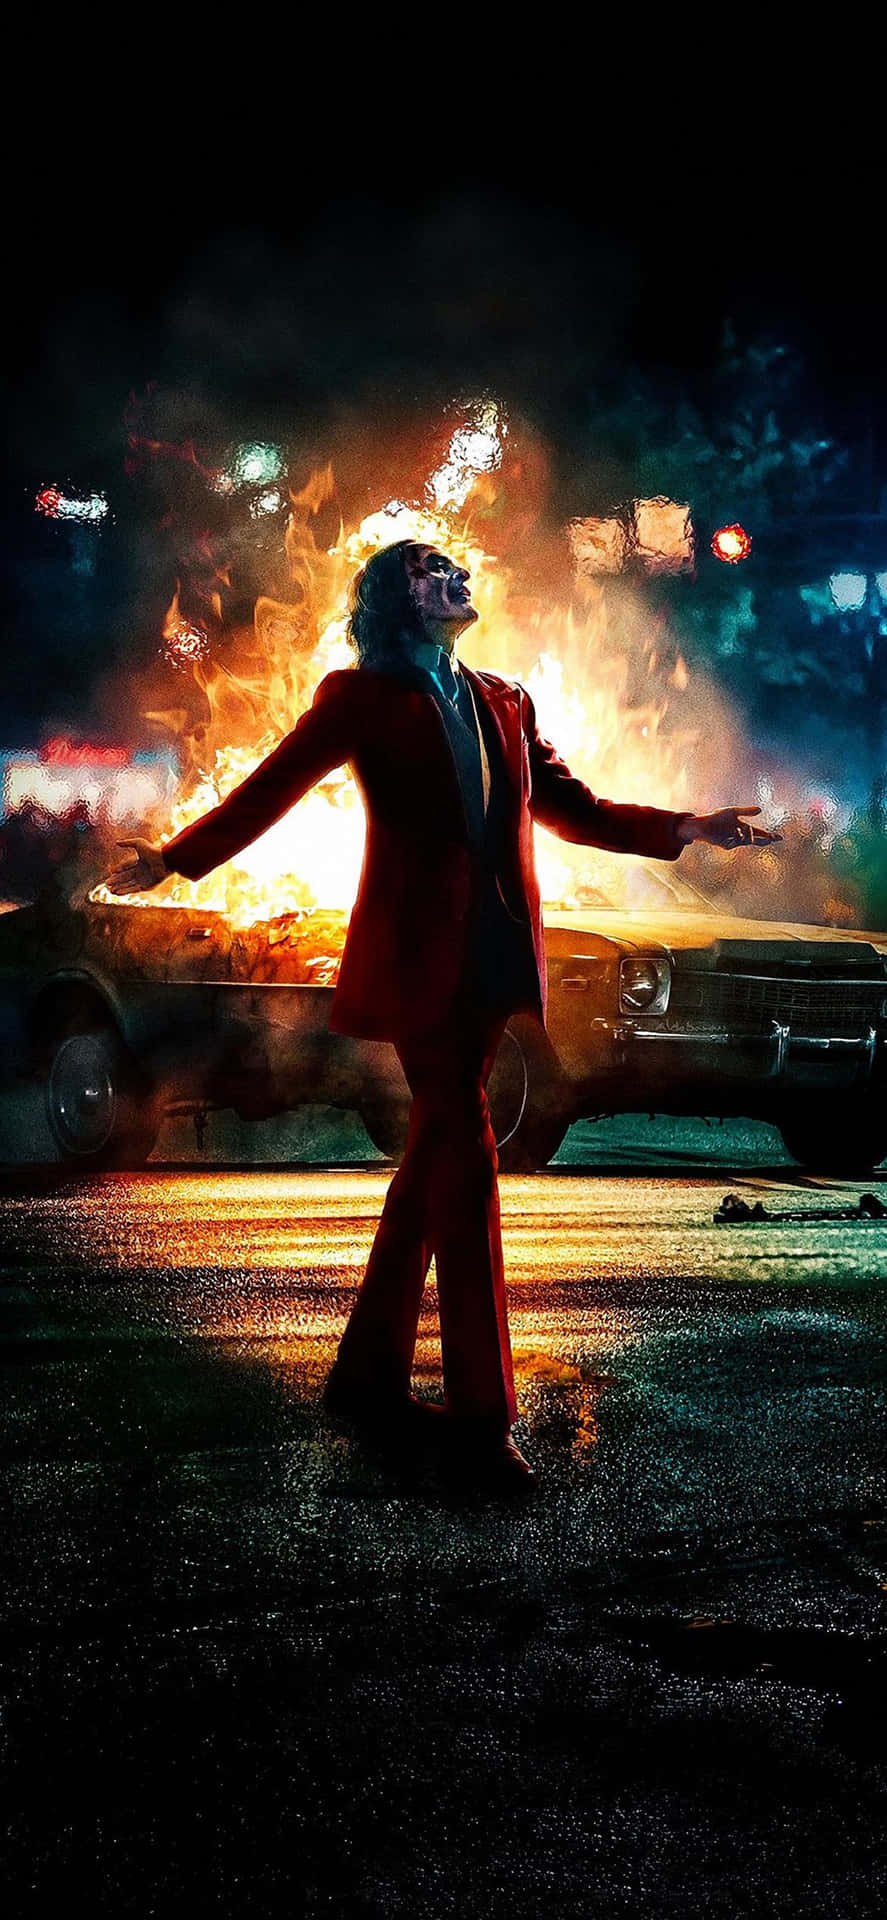 The Joker Movie Poster With A Man In Red Standing In Front Of A Car Wallpaper